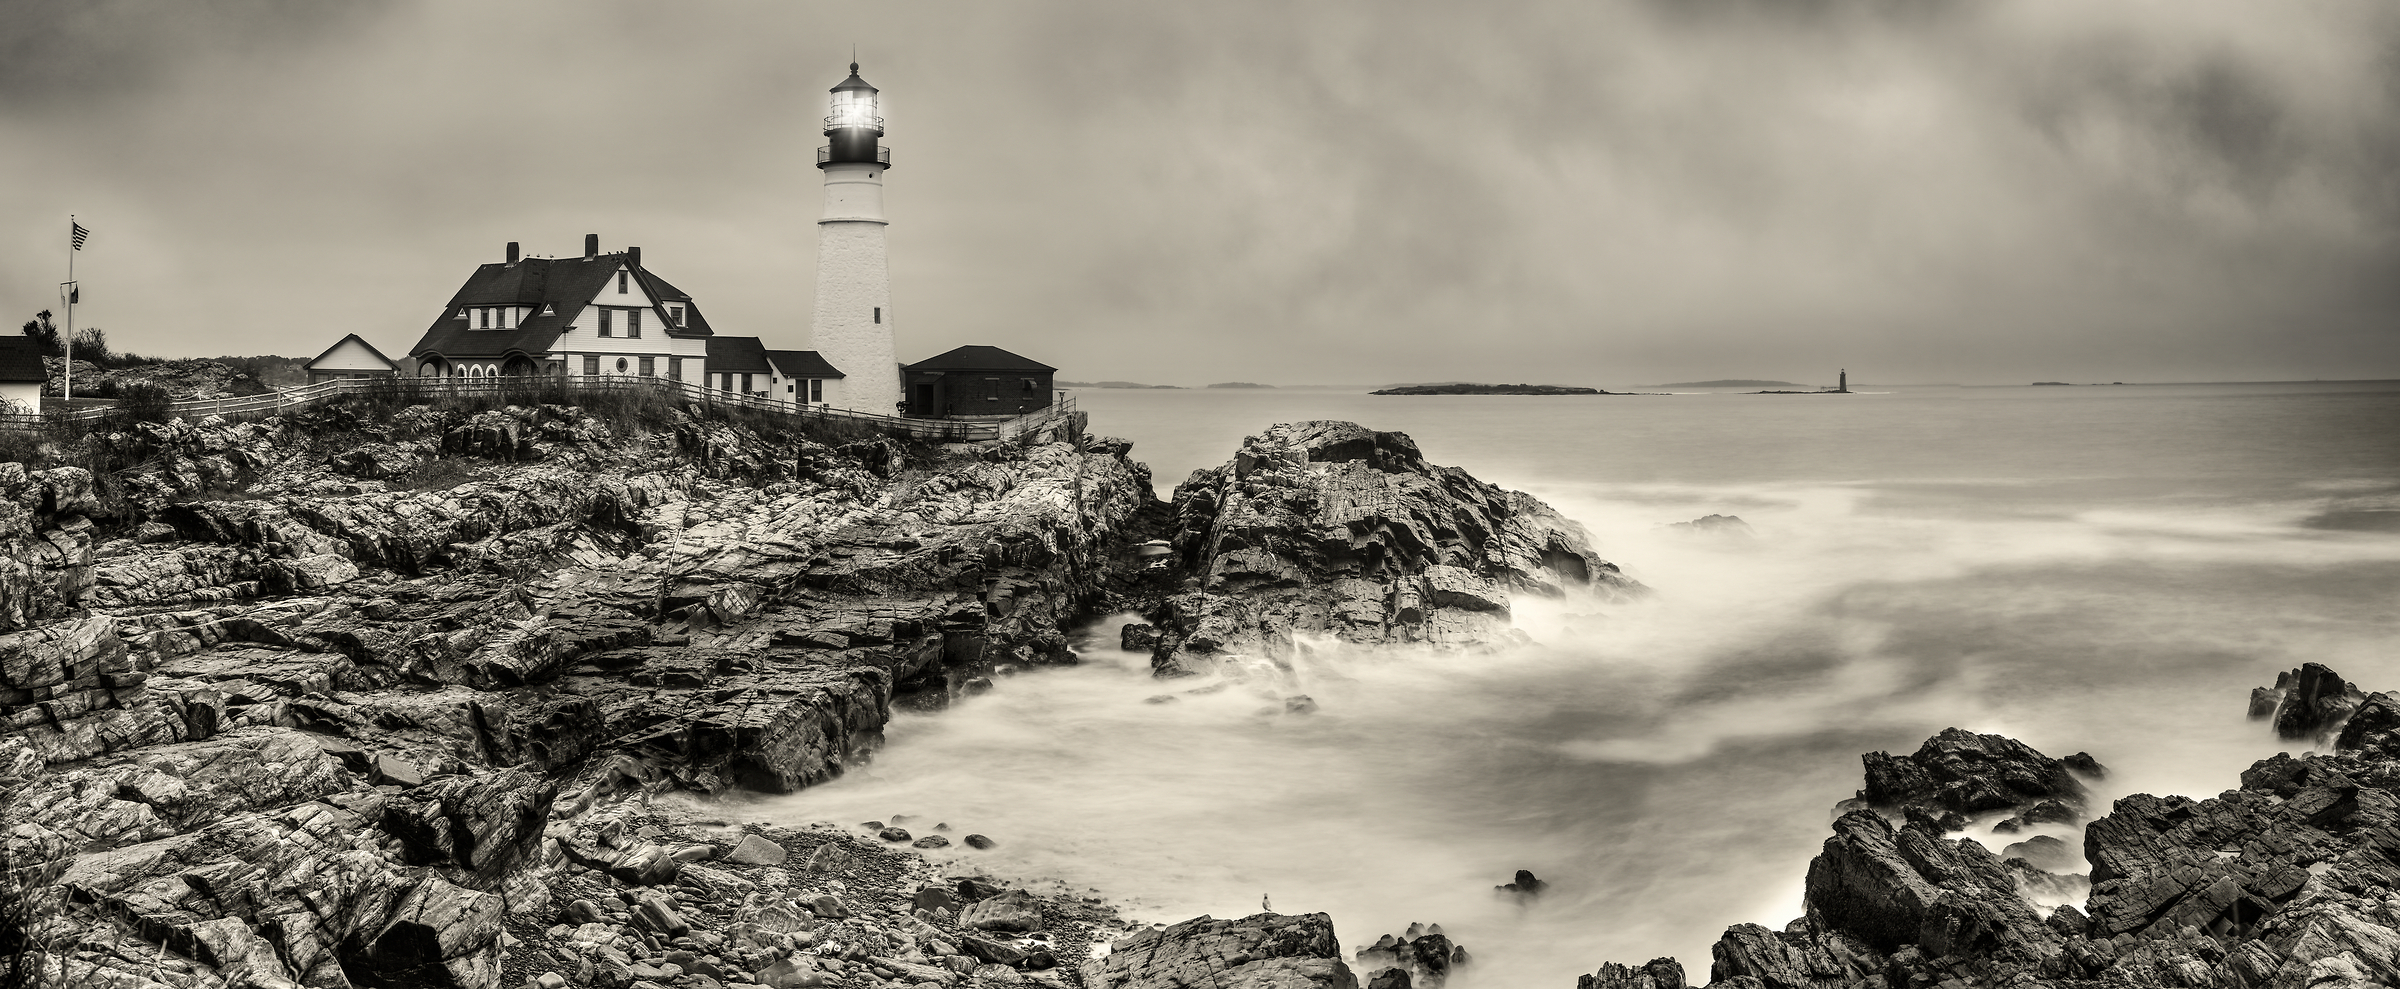 521 megapixels! An artistic photograph of a lighthouse with the ocean and rocks; photograph created by Phil Crawshay in Portland Head Lighthouse, Portland, Maine.